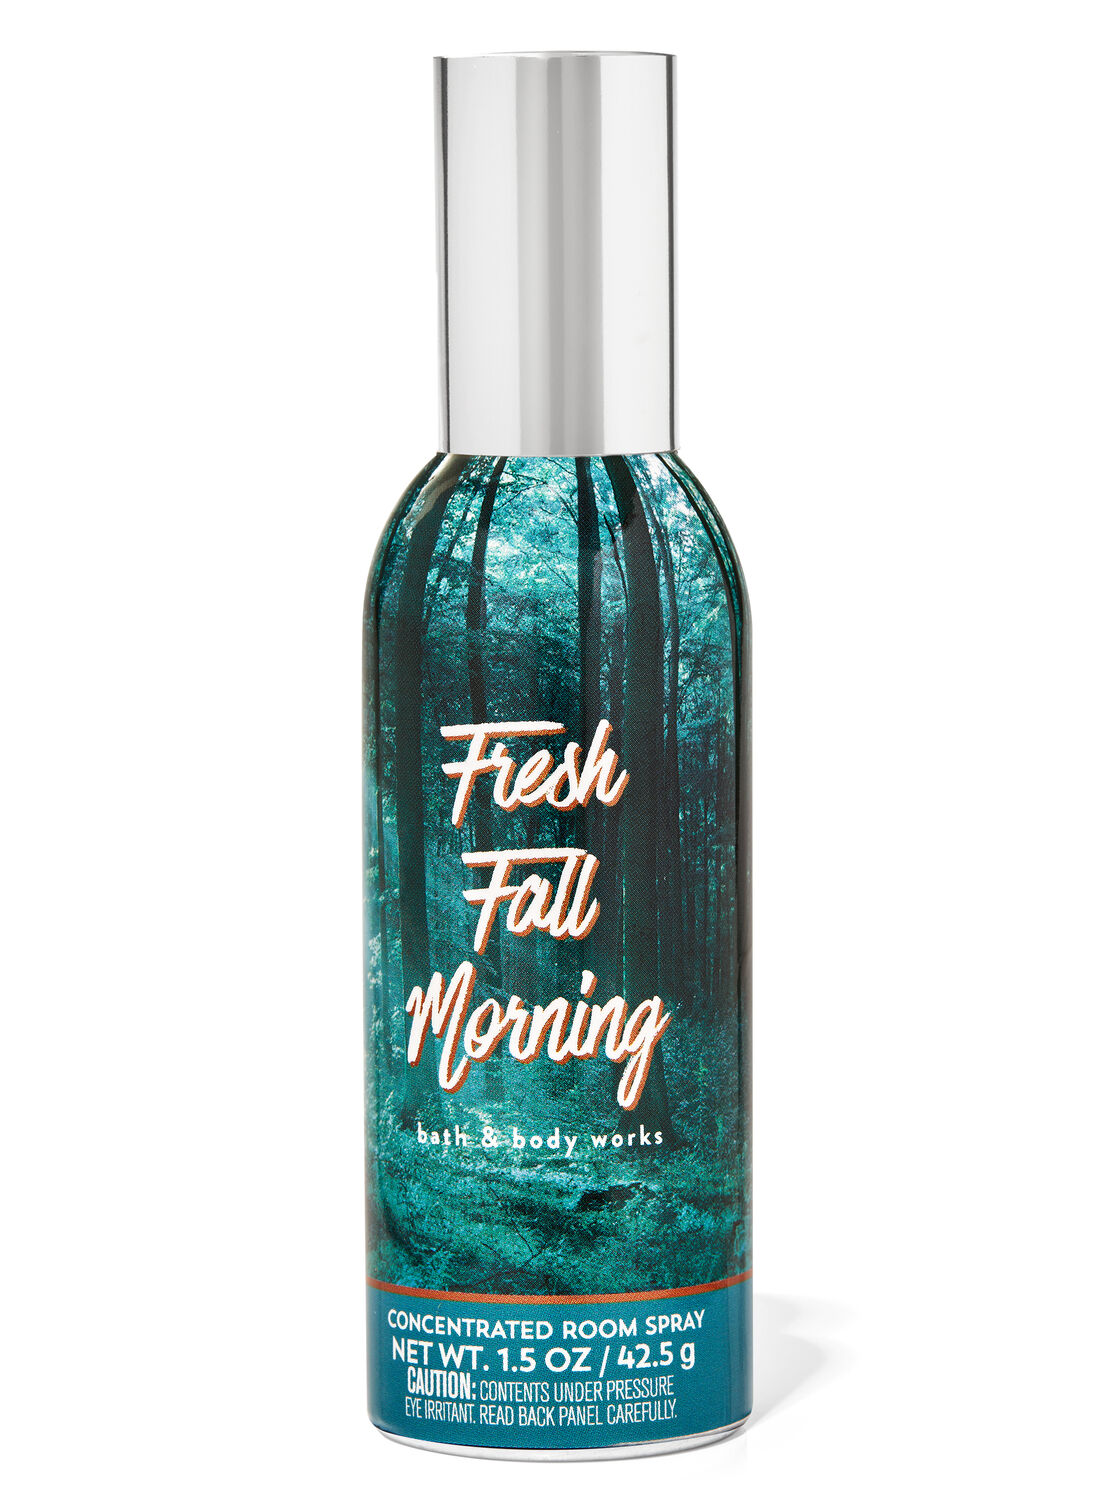 Fresh Fall Morning Concentrated Room Spray